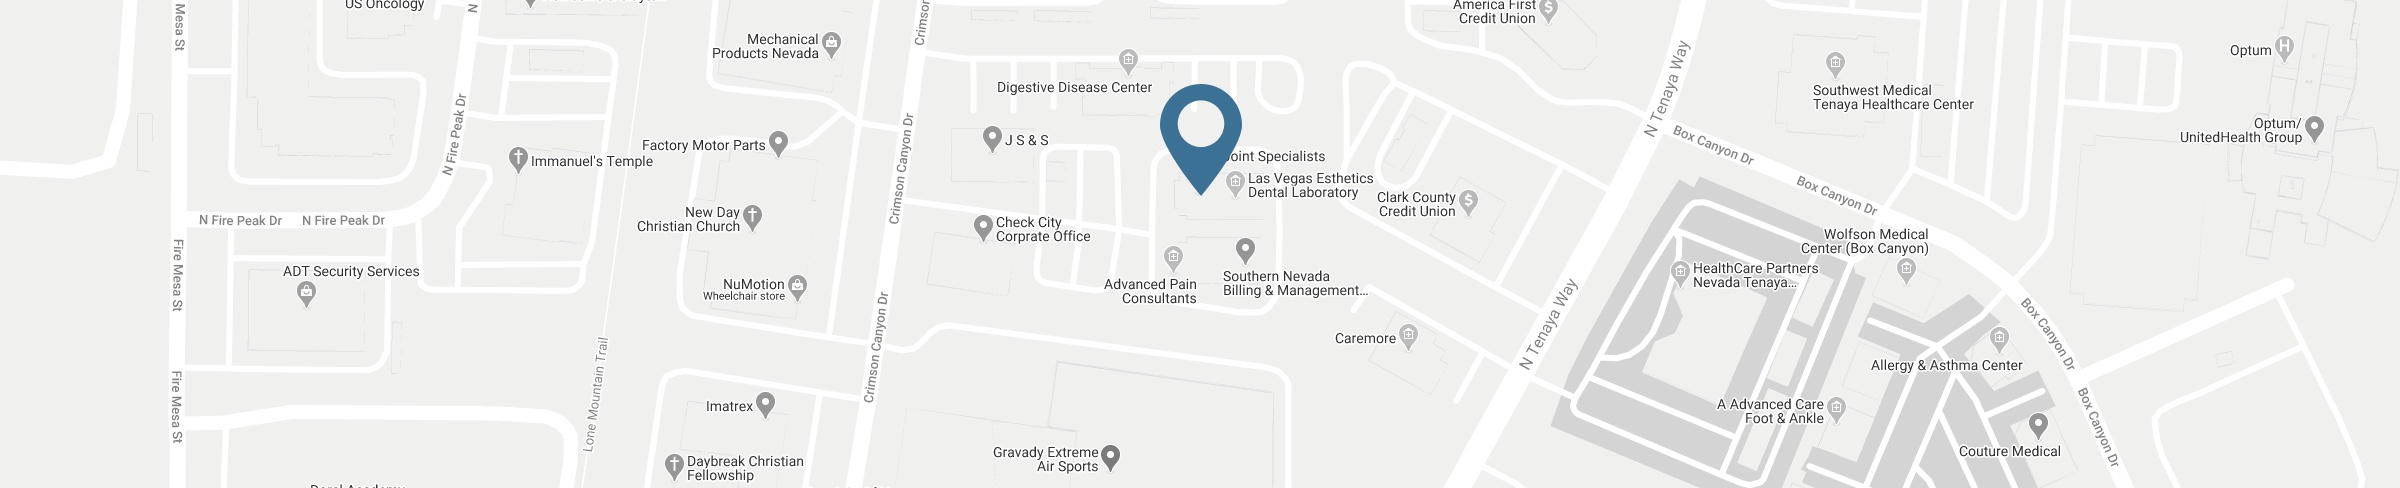 map of Dr. Manning's Orthopedic Office